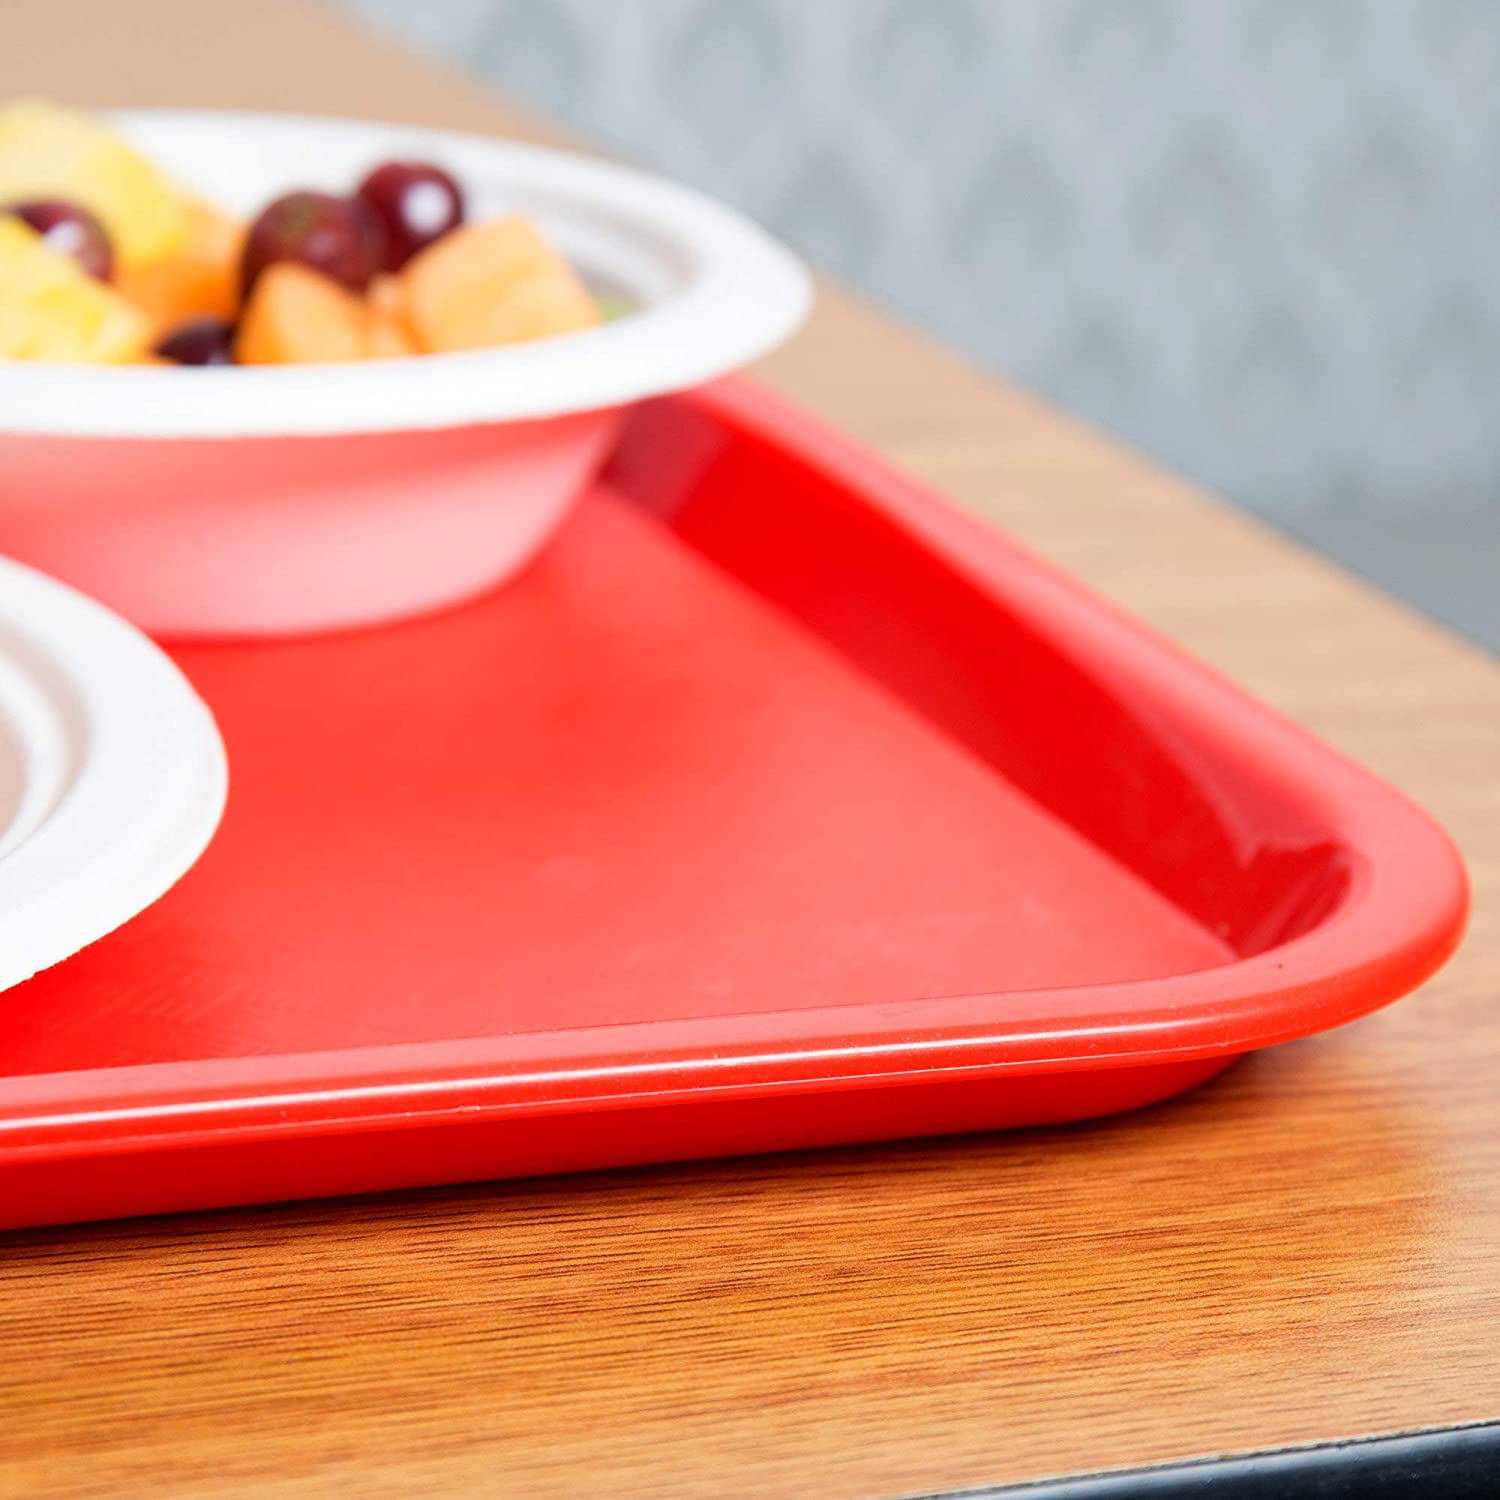 NJ Rectangular Plastic Serving Tray, Red Color Anti Skid Tray for Restaurant, Home and Hotel use : 2 Pcs Set